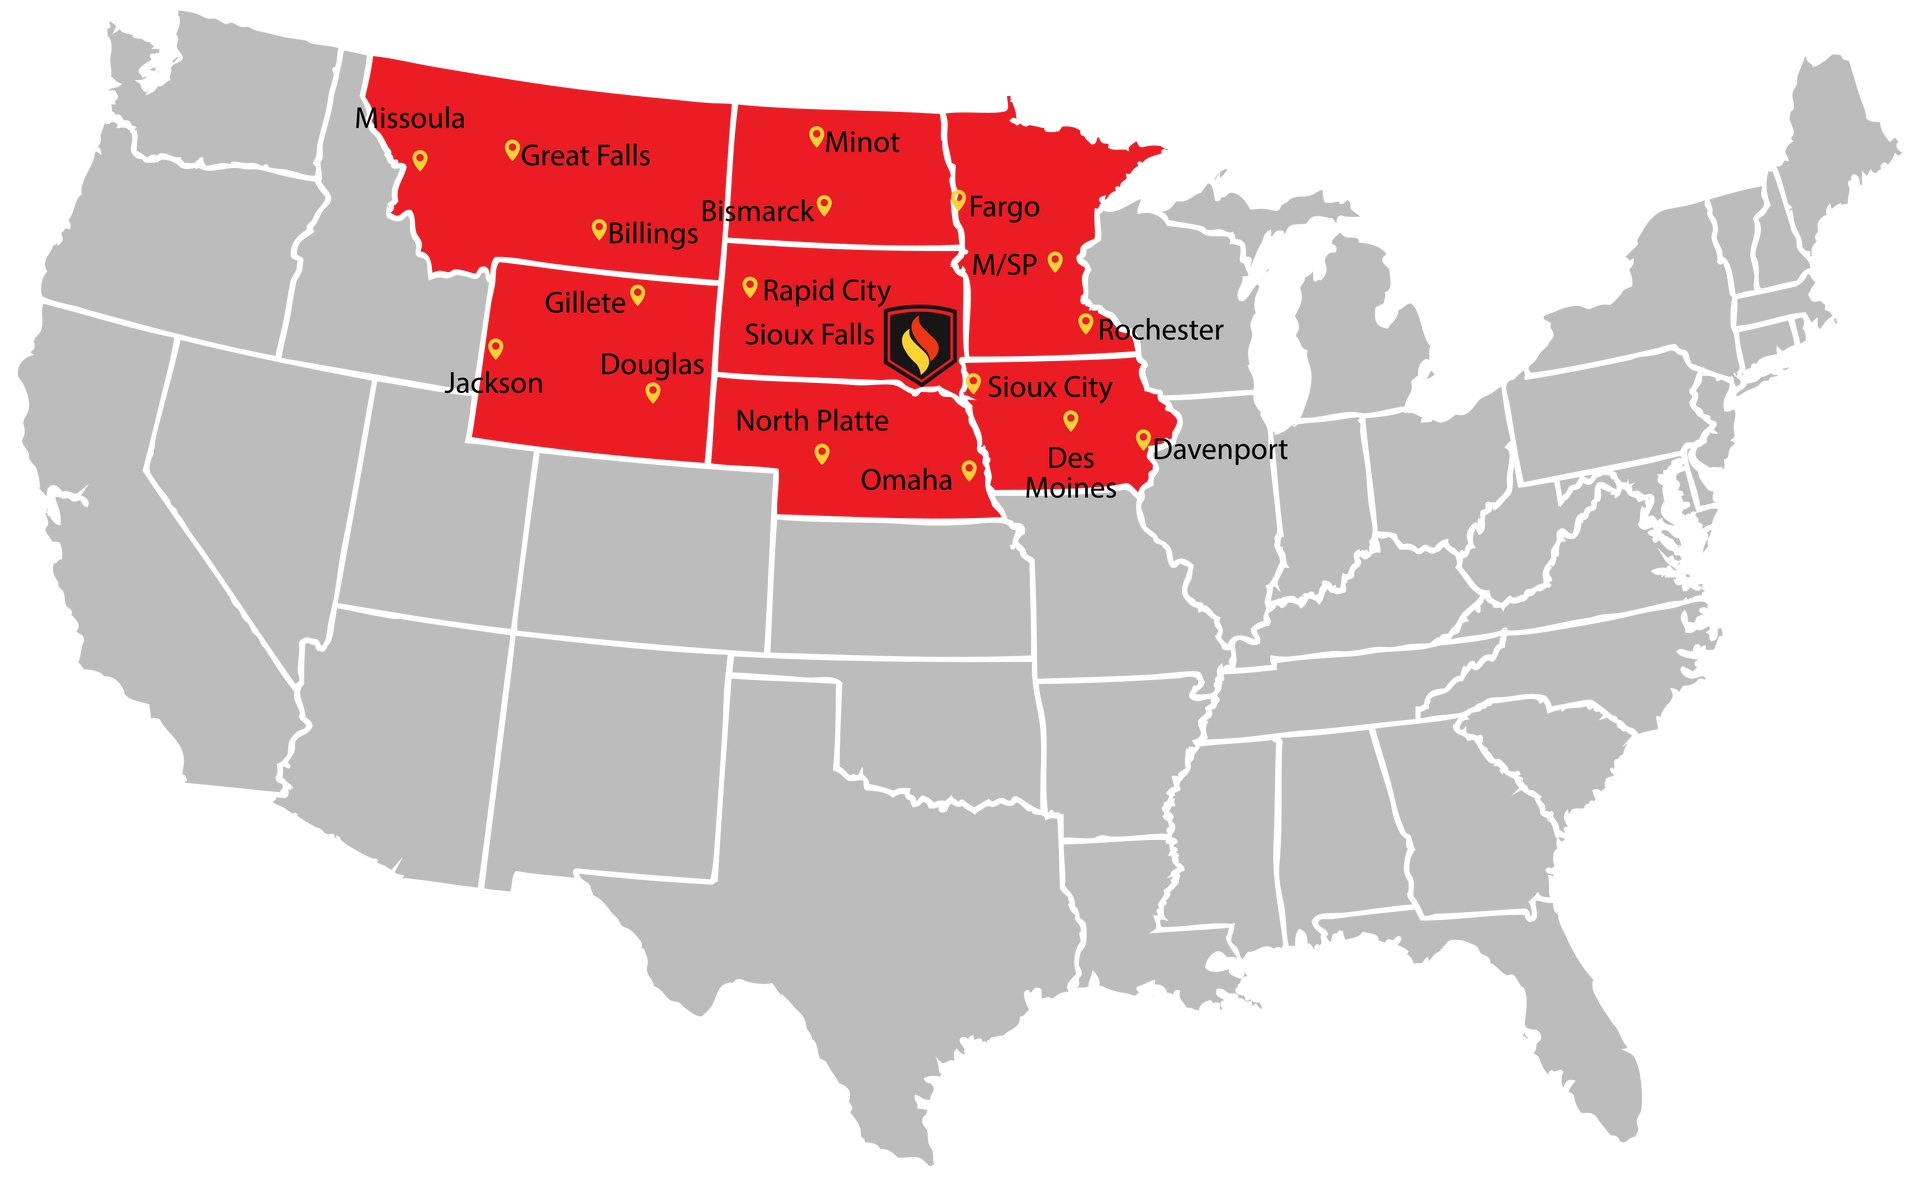 Our 10-state service area across the northern U.S.